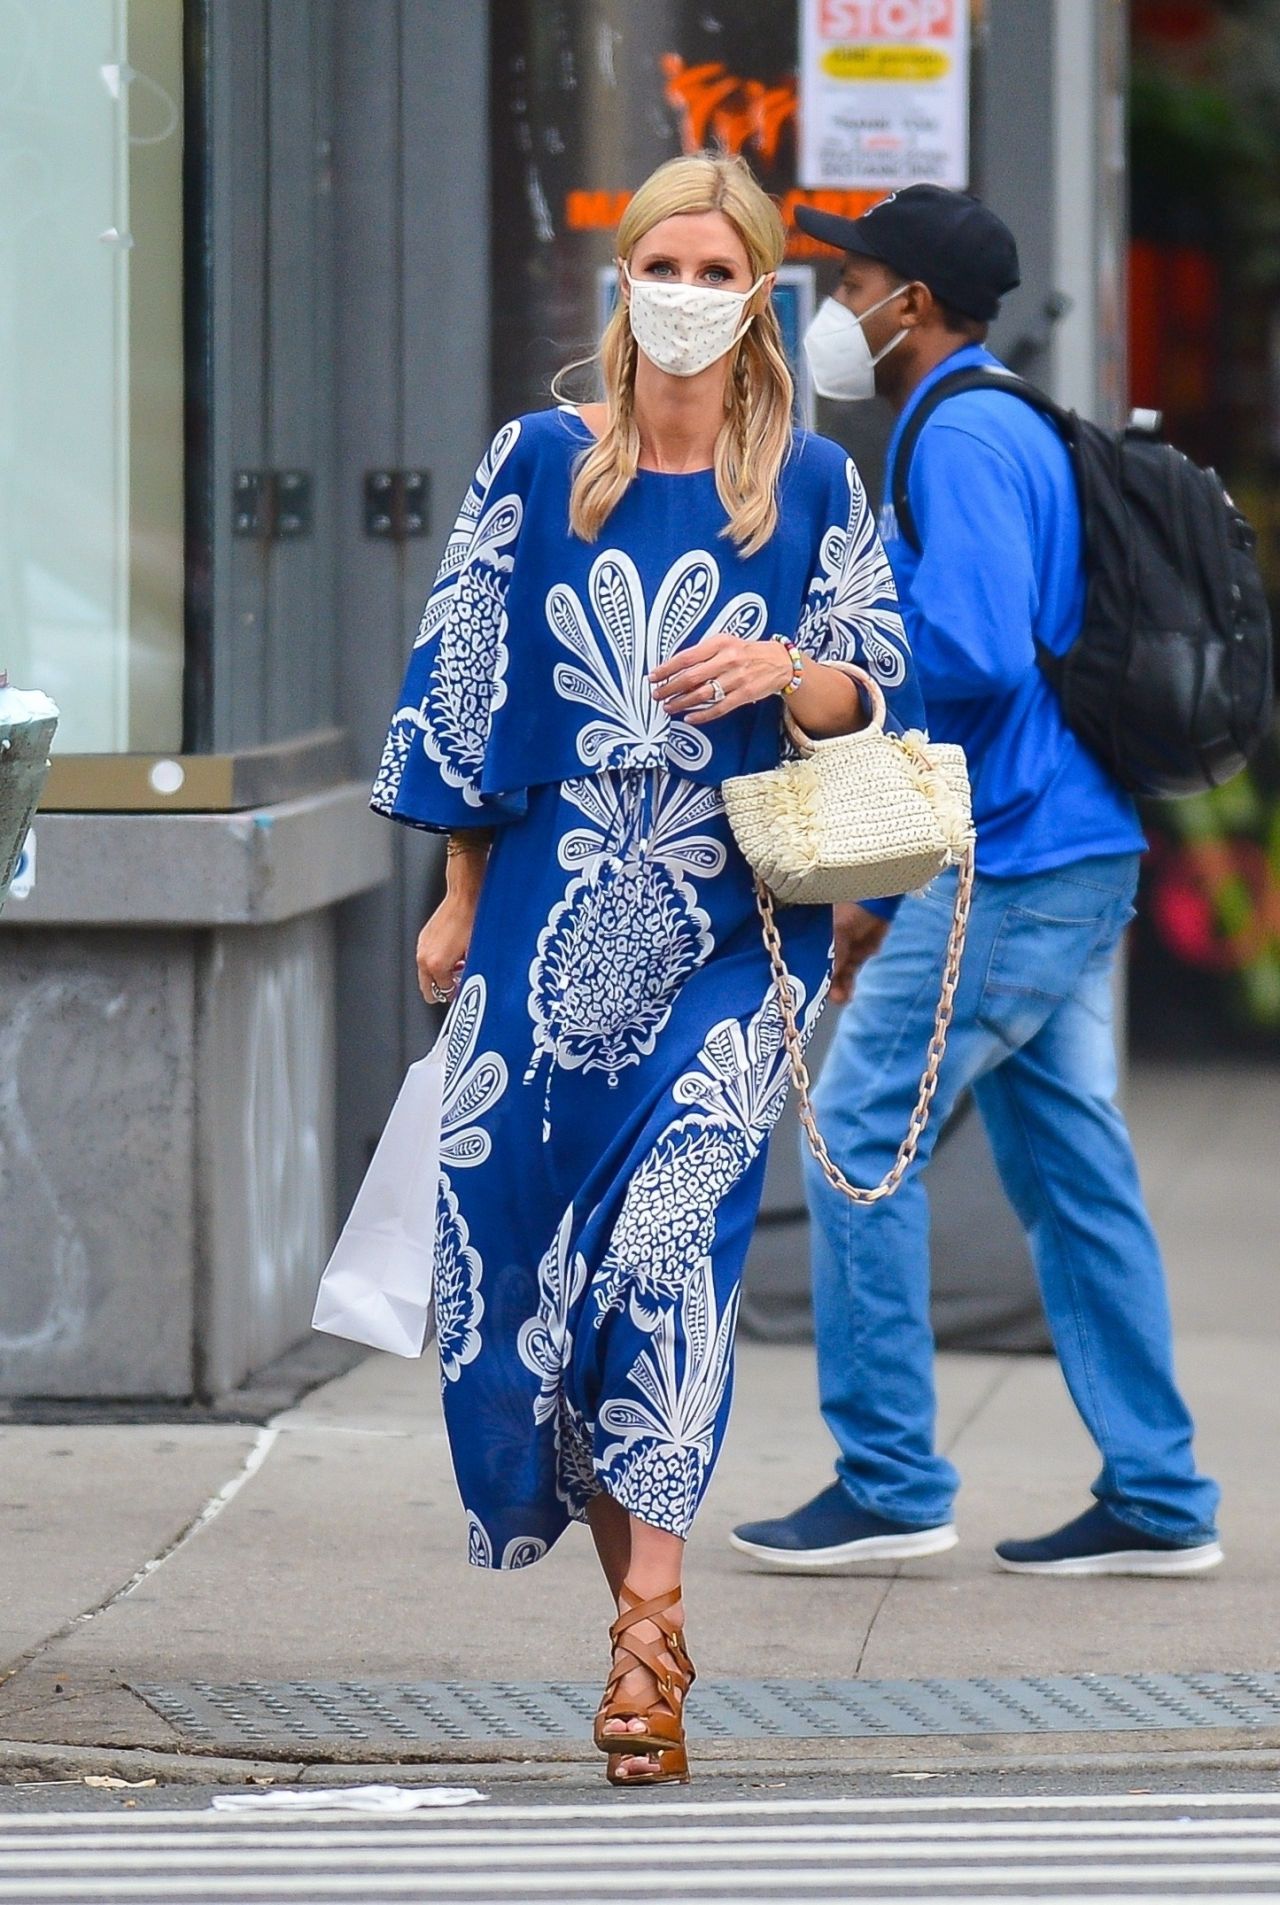 nicky-hilton-in-an-ethereal-blue-and-white-maxi-dress-and-a-crocheted-purse-shopping-in-ny-10-01-2020-6.jpg